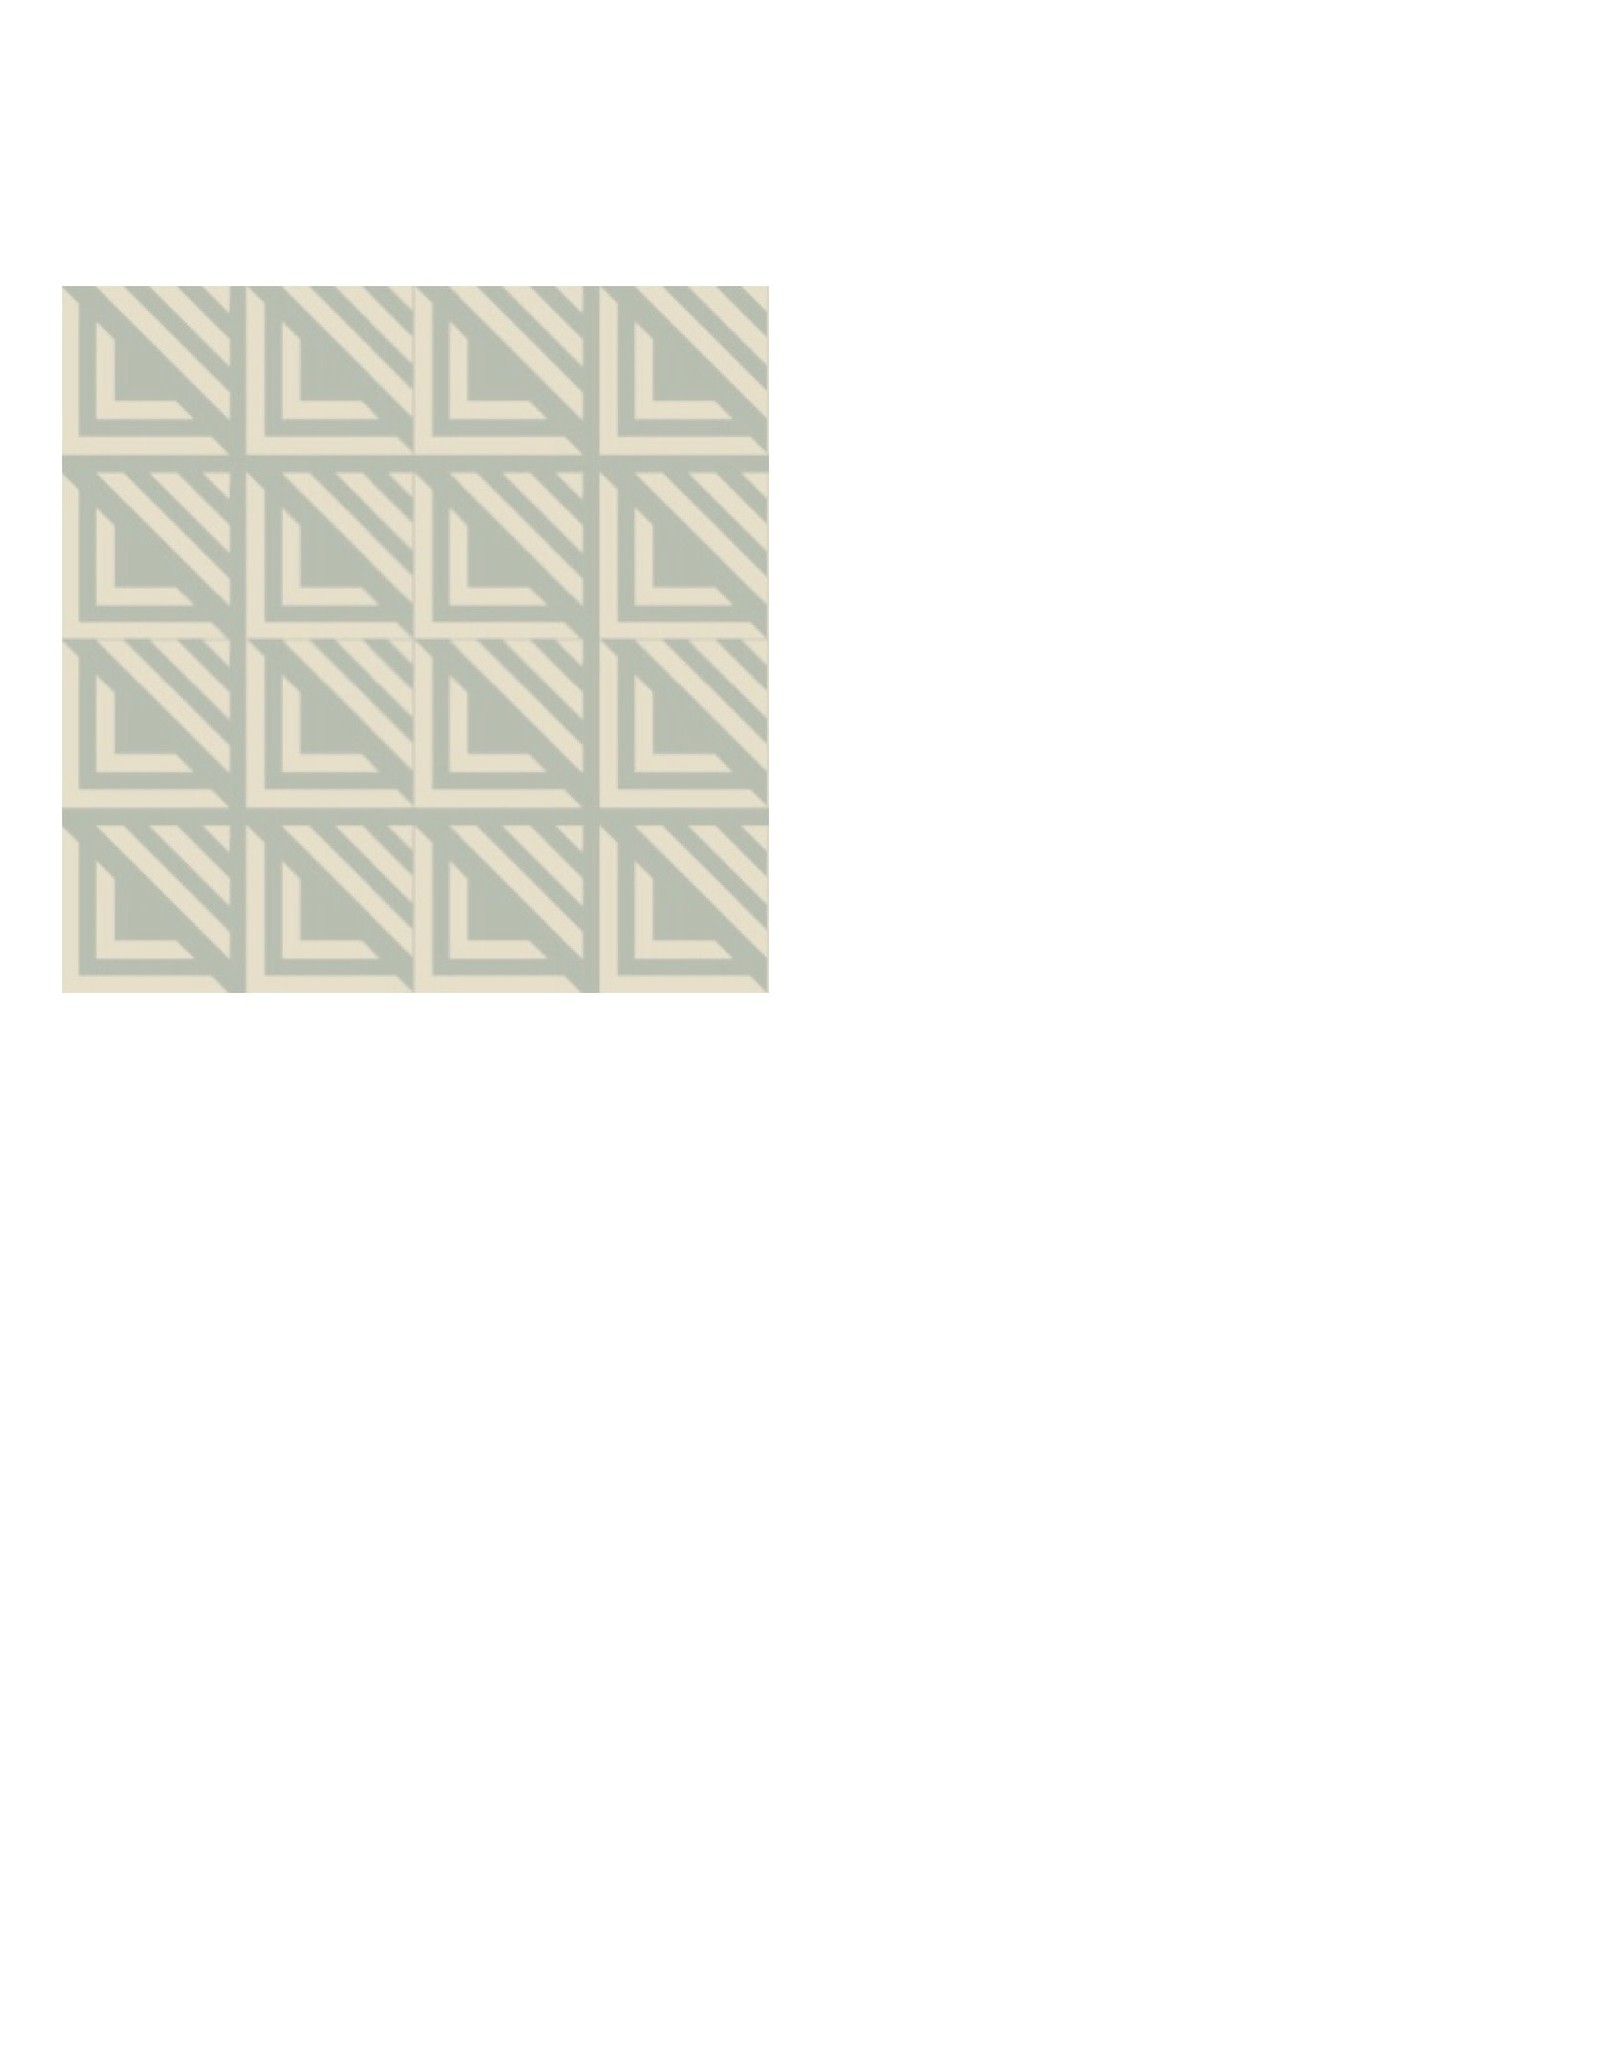 HAND MADE CEMENT TILE, 200 X 200 X 16MM (GREY)